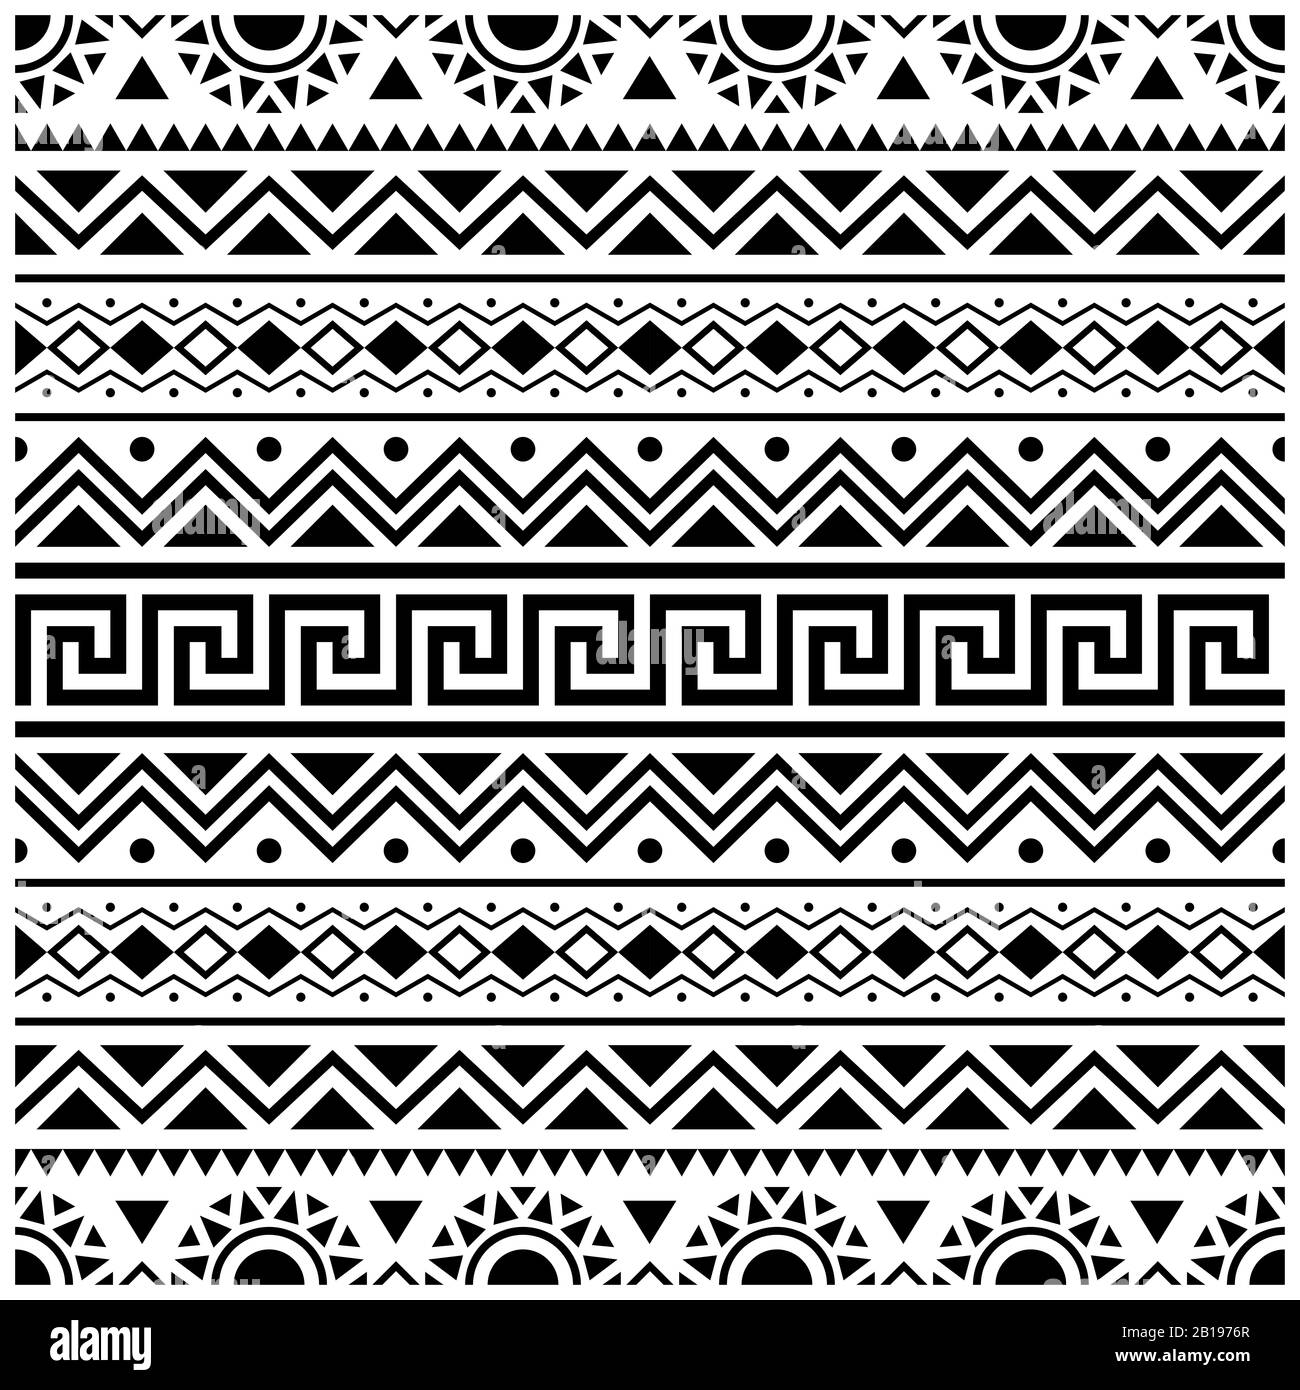 Stripe Ethnic Aztec Pattern design. Tribal ethnic seamless pattern Illustration vector in black and white color Stock Photo